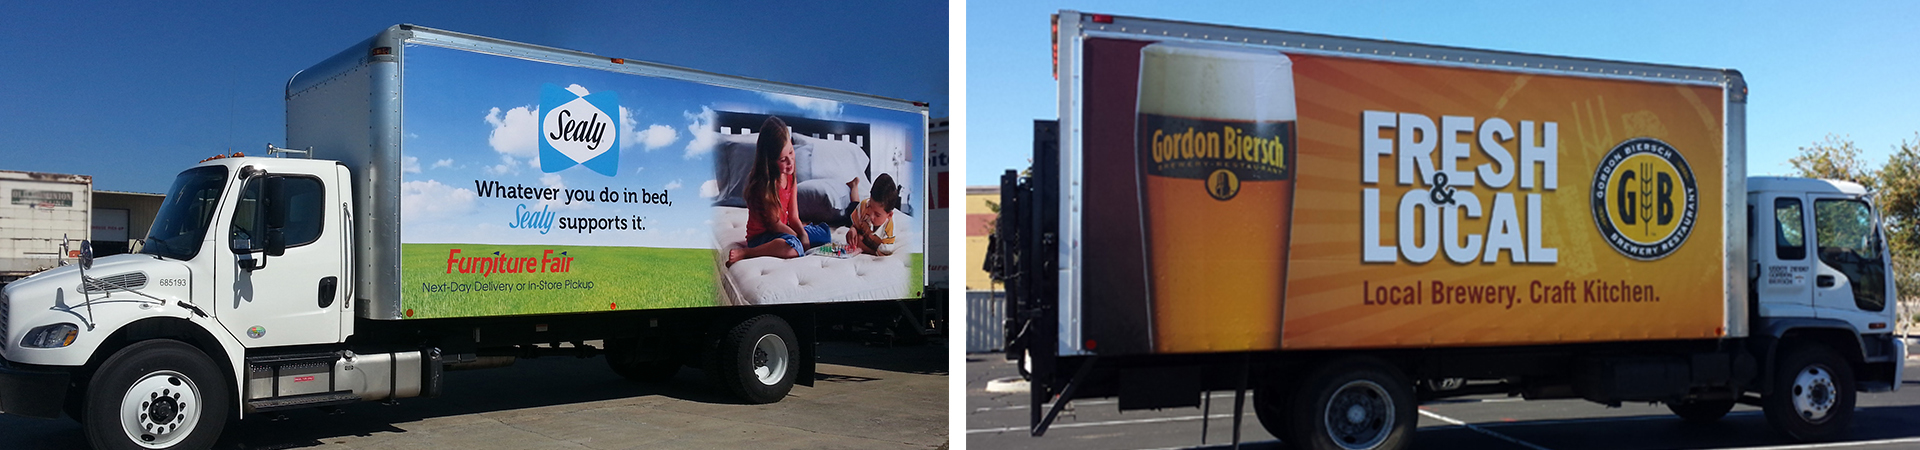 Truck Skins advertising a mattress company and a local brewery.